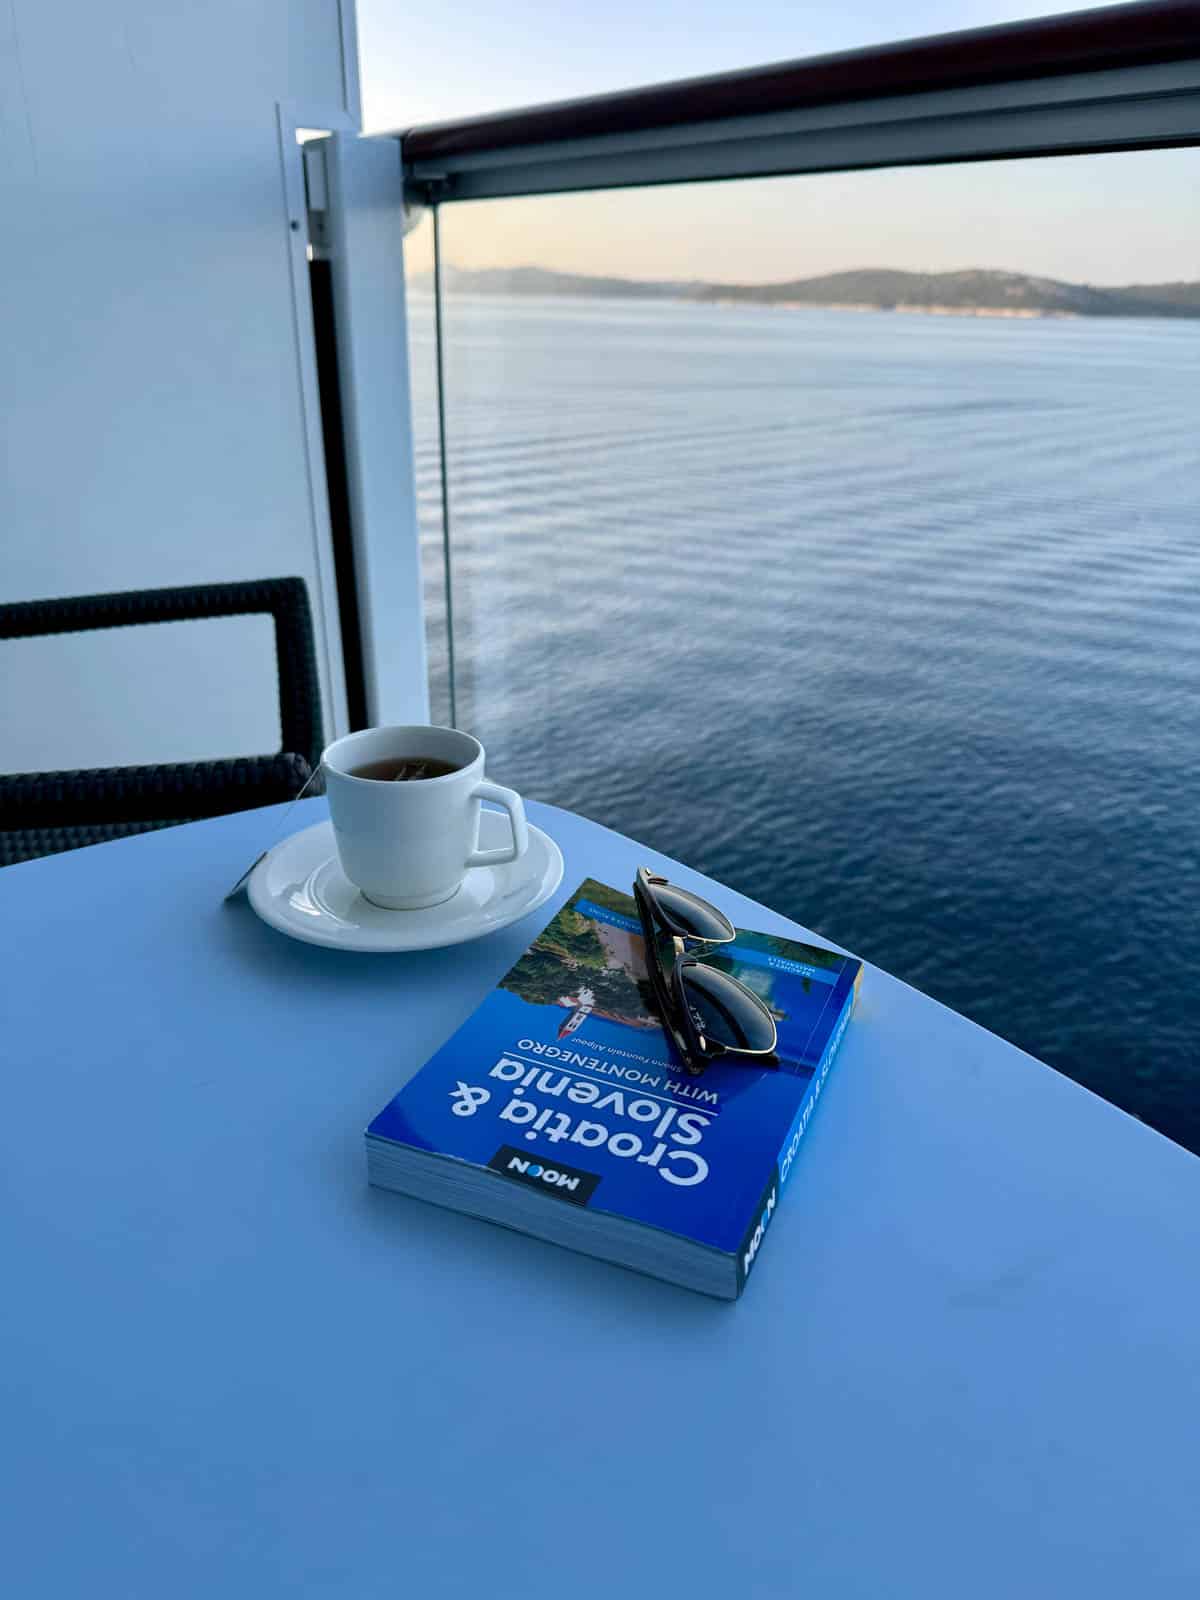 Table on the balcony of a cruise ship with cup of tea, book, and sunglasses.